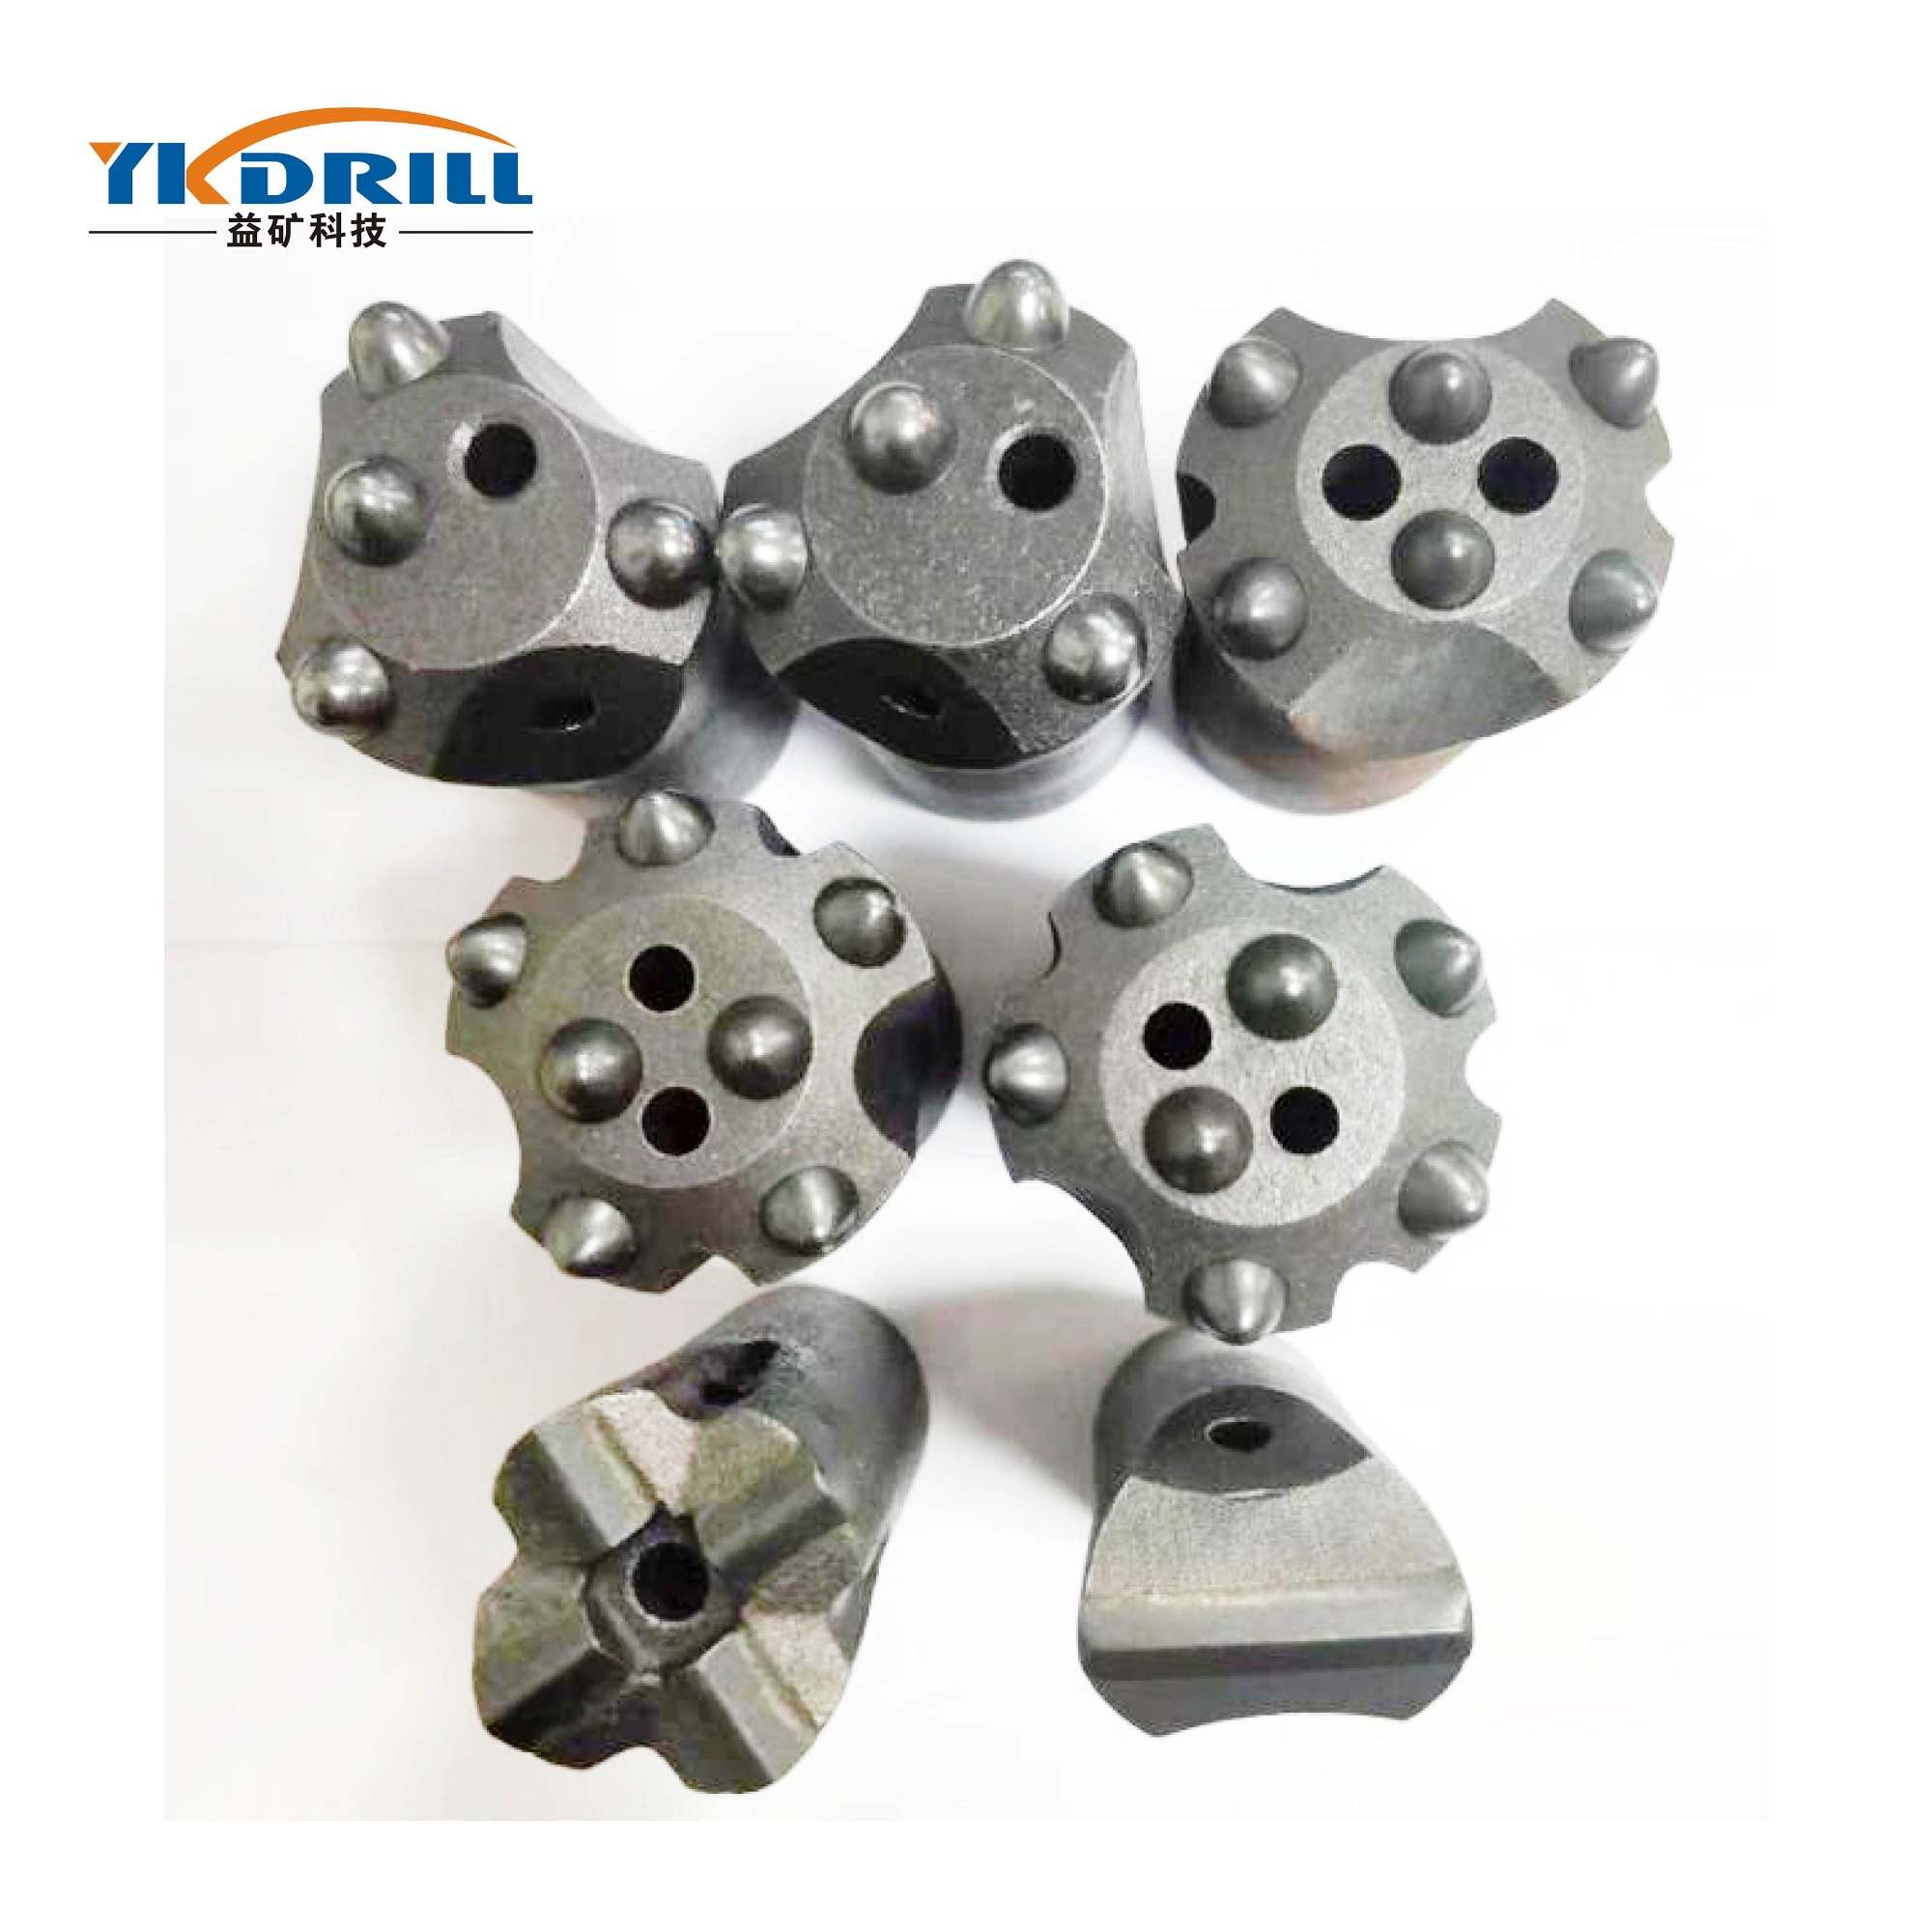 Detailed Analysis Of Coal Drill Bits